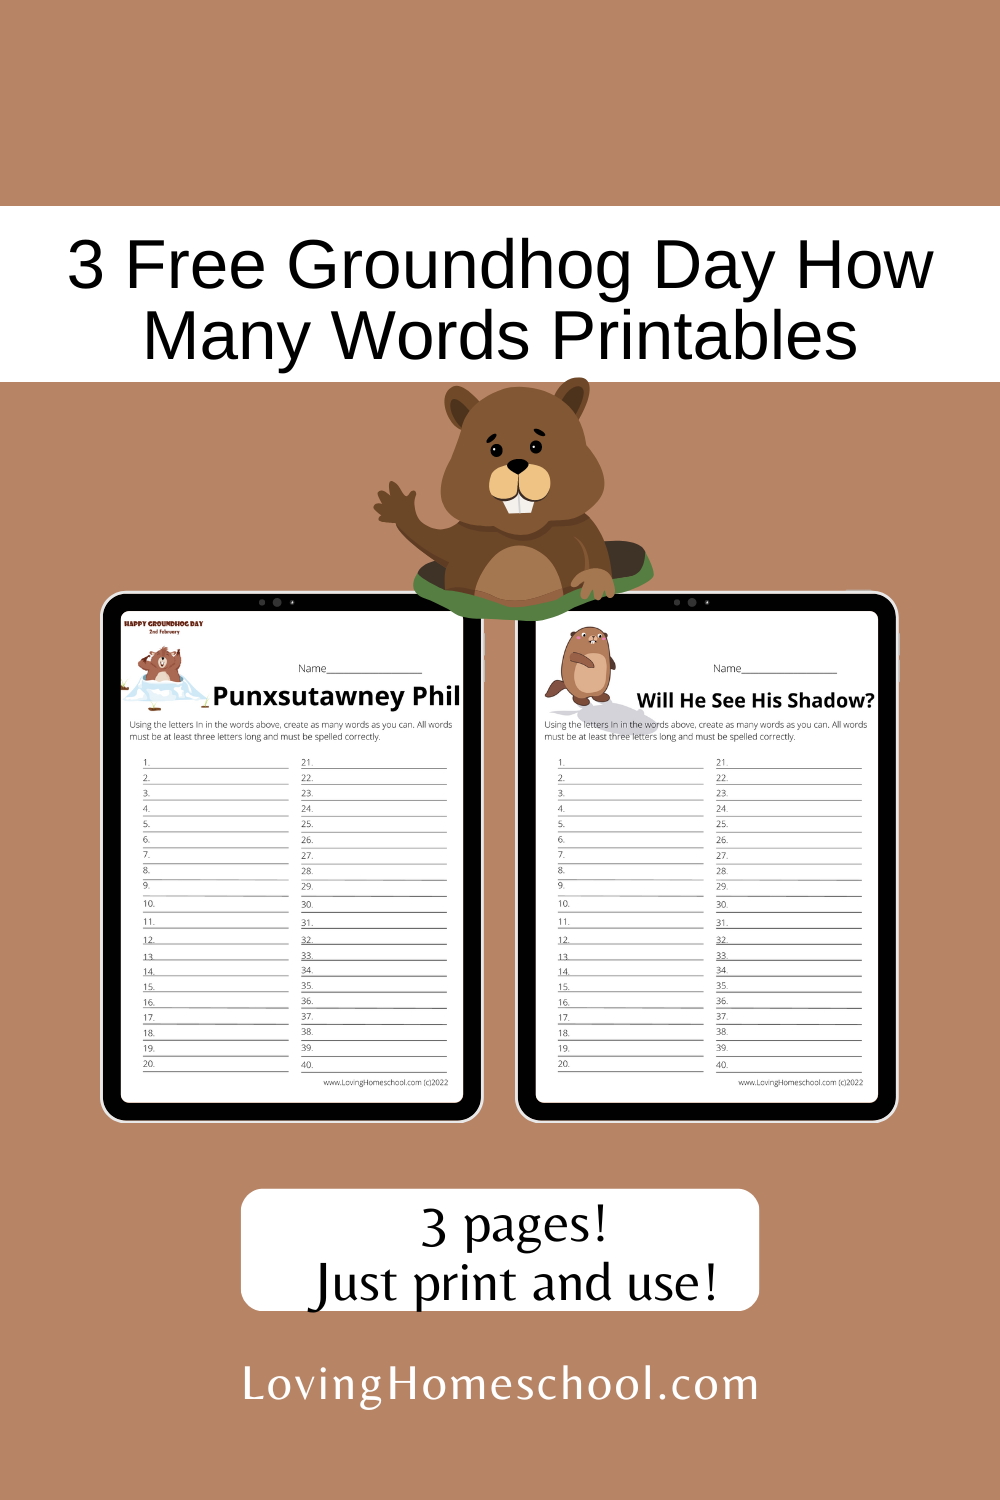 Free Groundhog Day How Many Words Printables Pinterest Pin